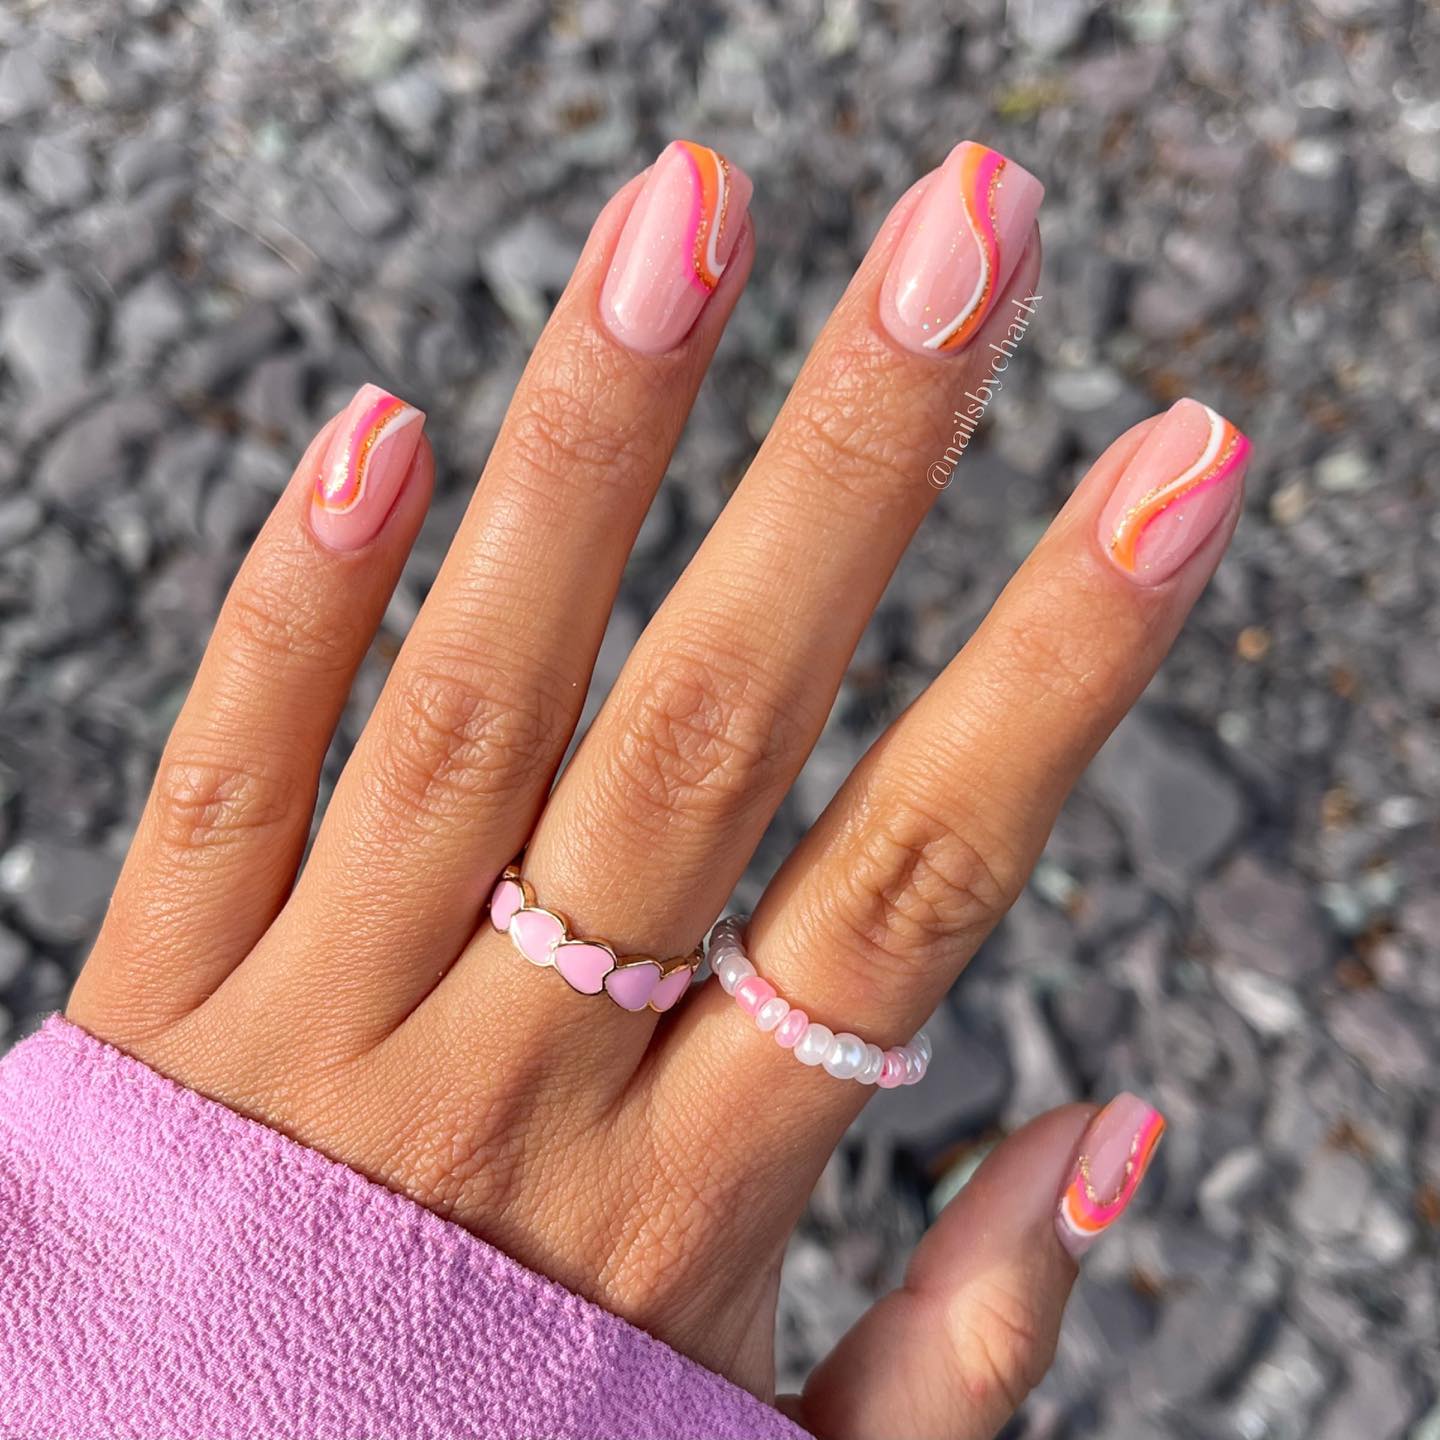 Short pink and cute with a pop of orange, this is the ultimate summer mani!